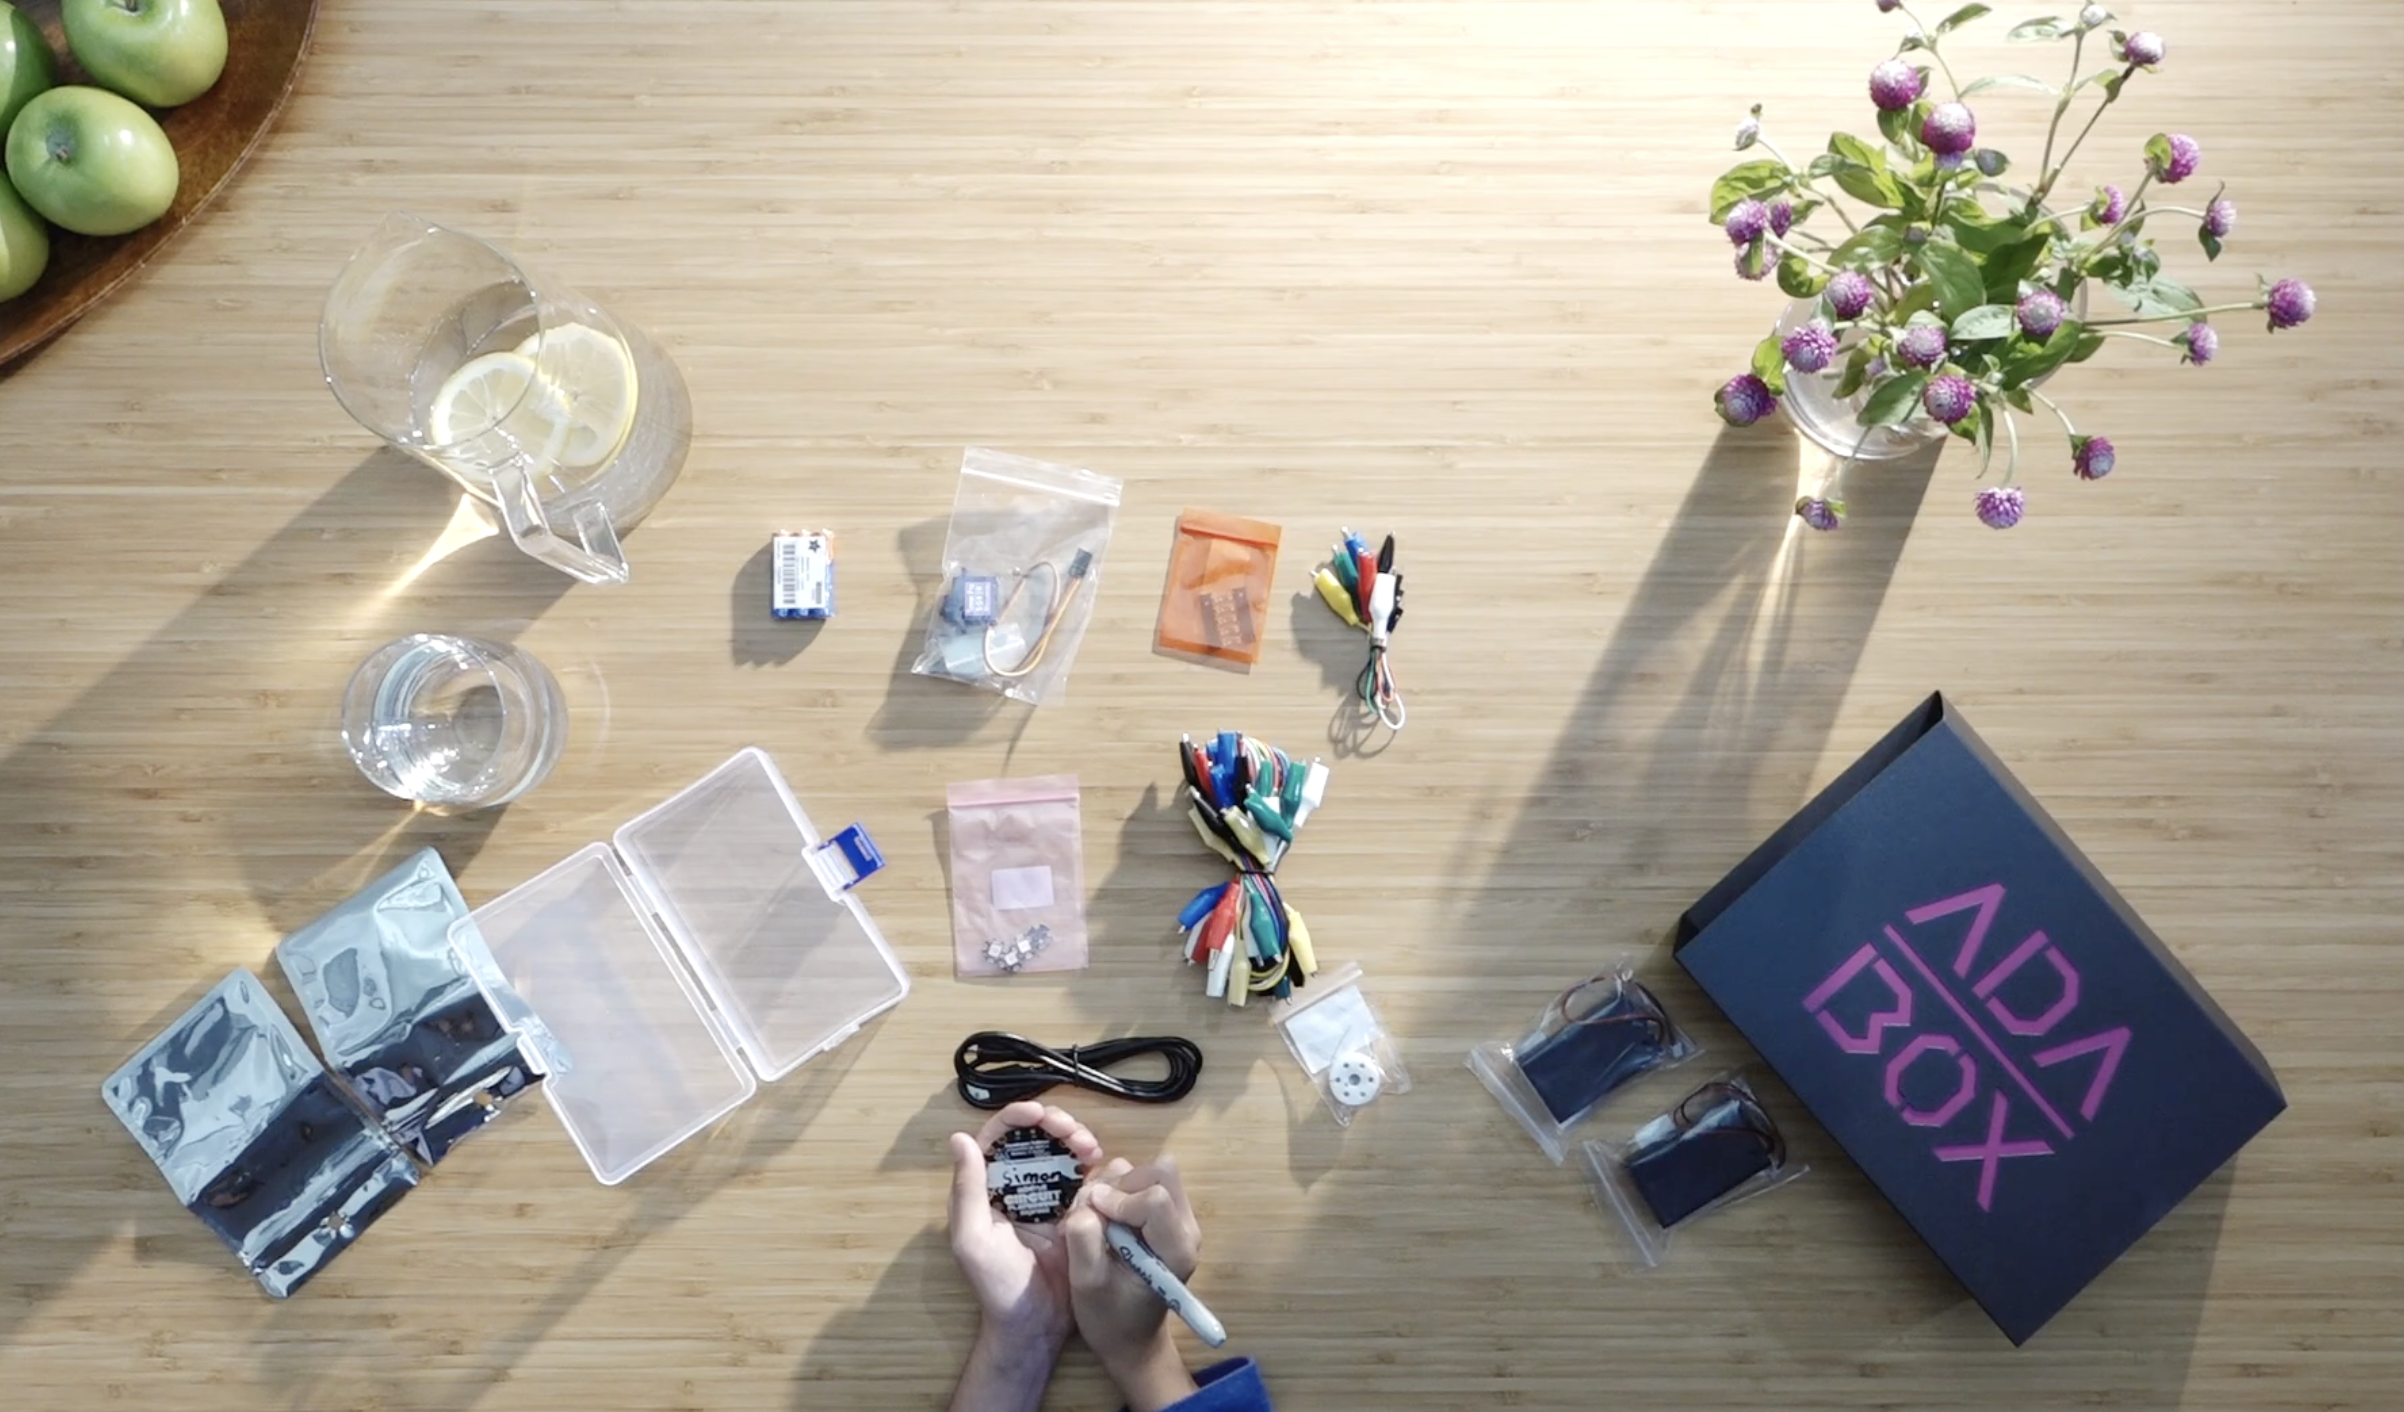 AdaFruit's subscription maker box, AdaBox, shown on a table with a variety of components